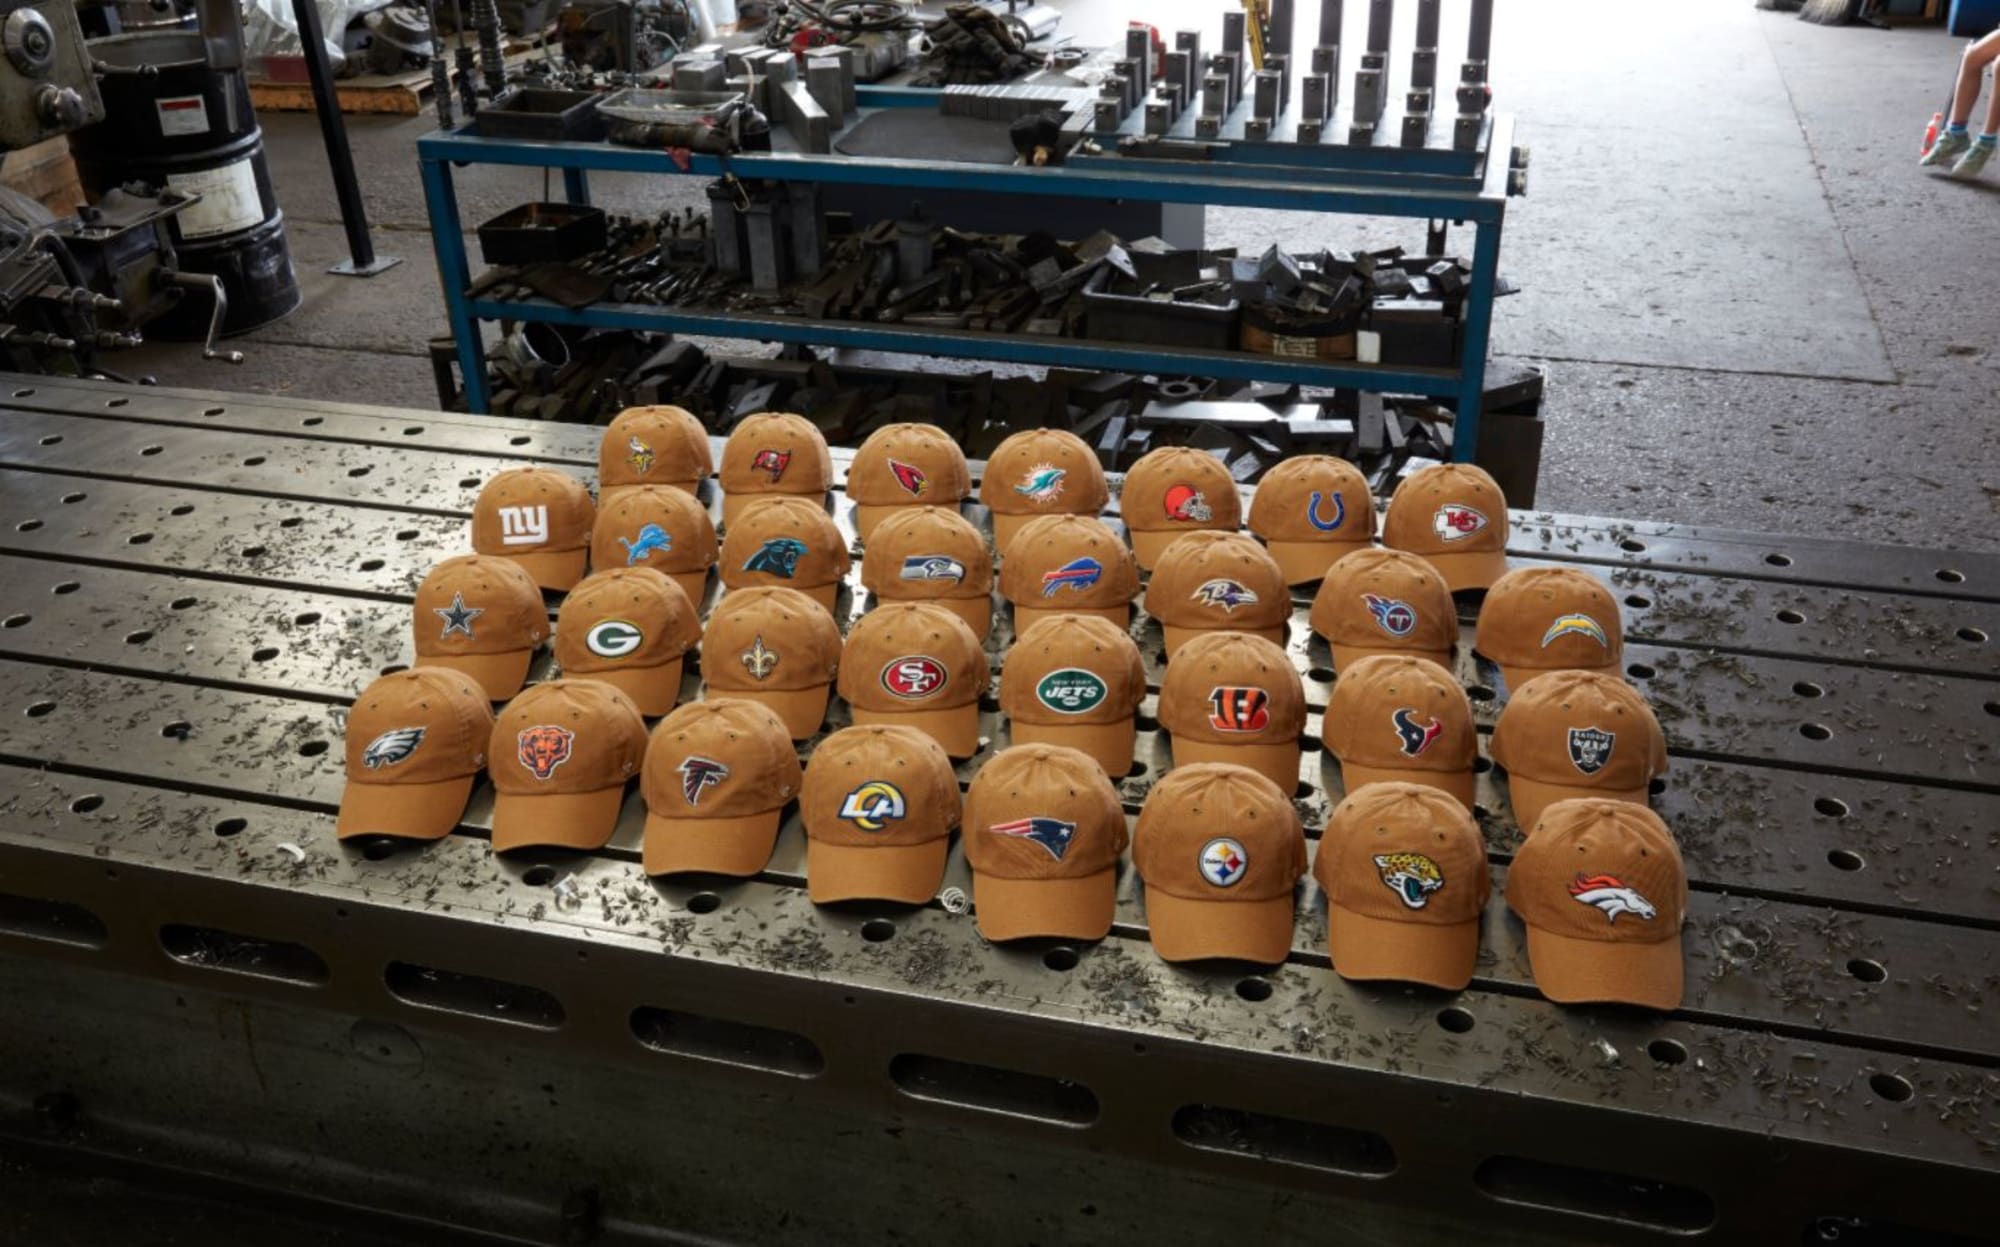 New England Patriots fans will love these Carhartt/'47 Brand hats